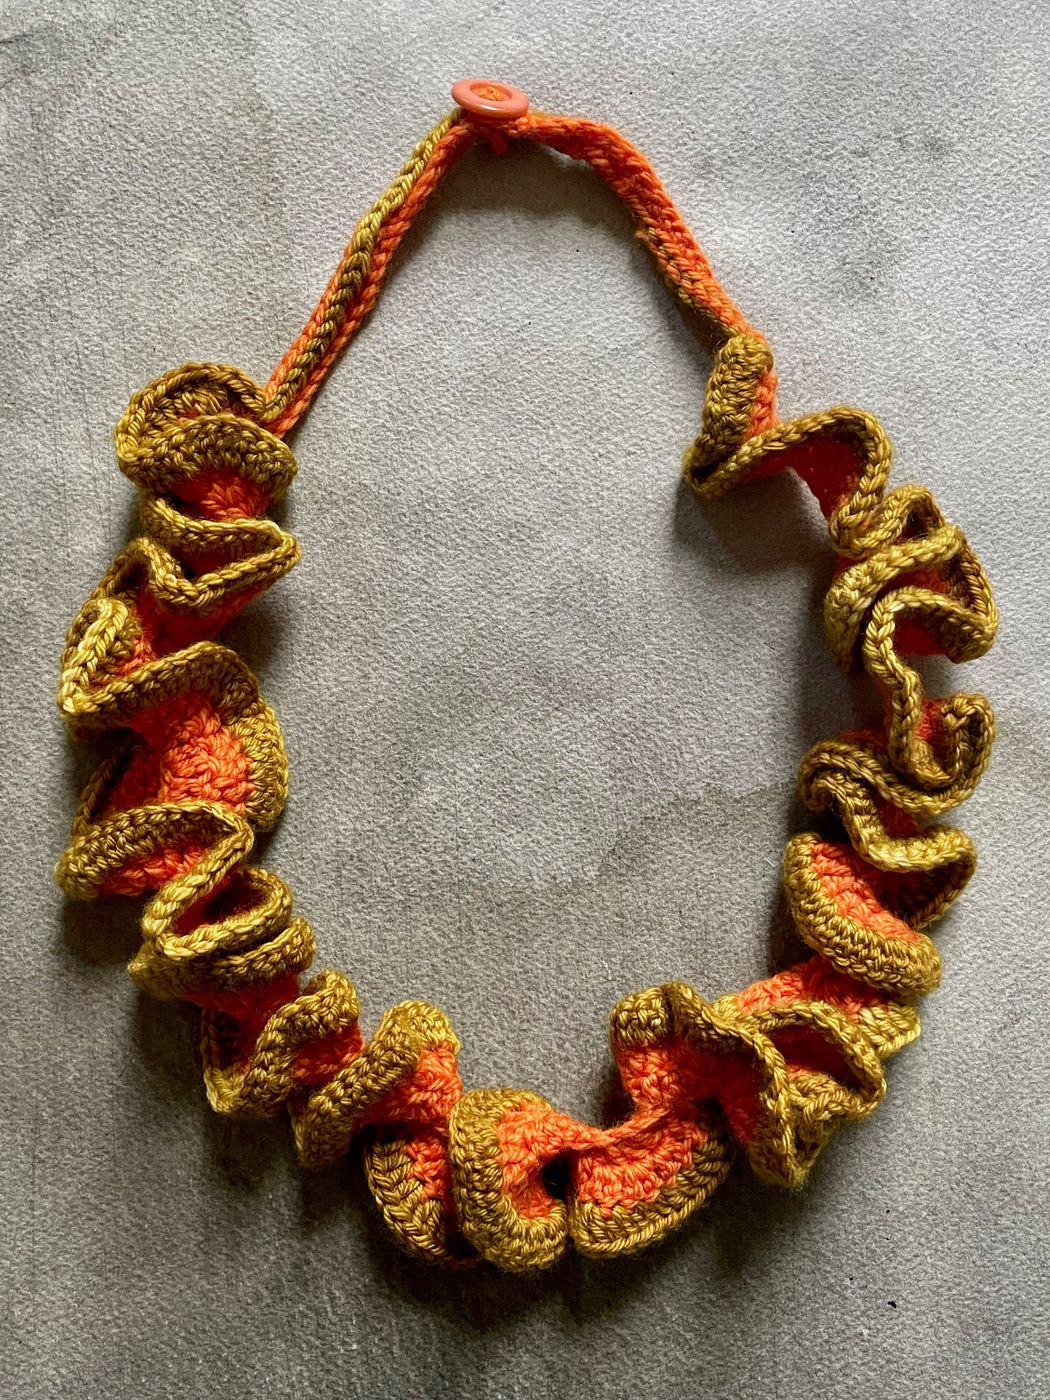 "Ruffle" Hand-Crocheted Necklace by Albo - Pimento Olive